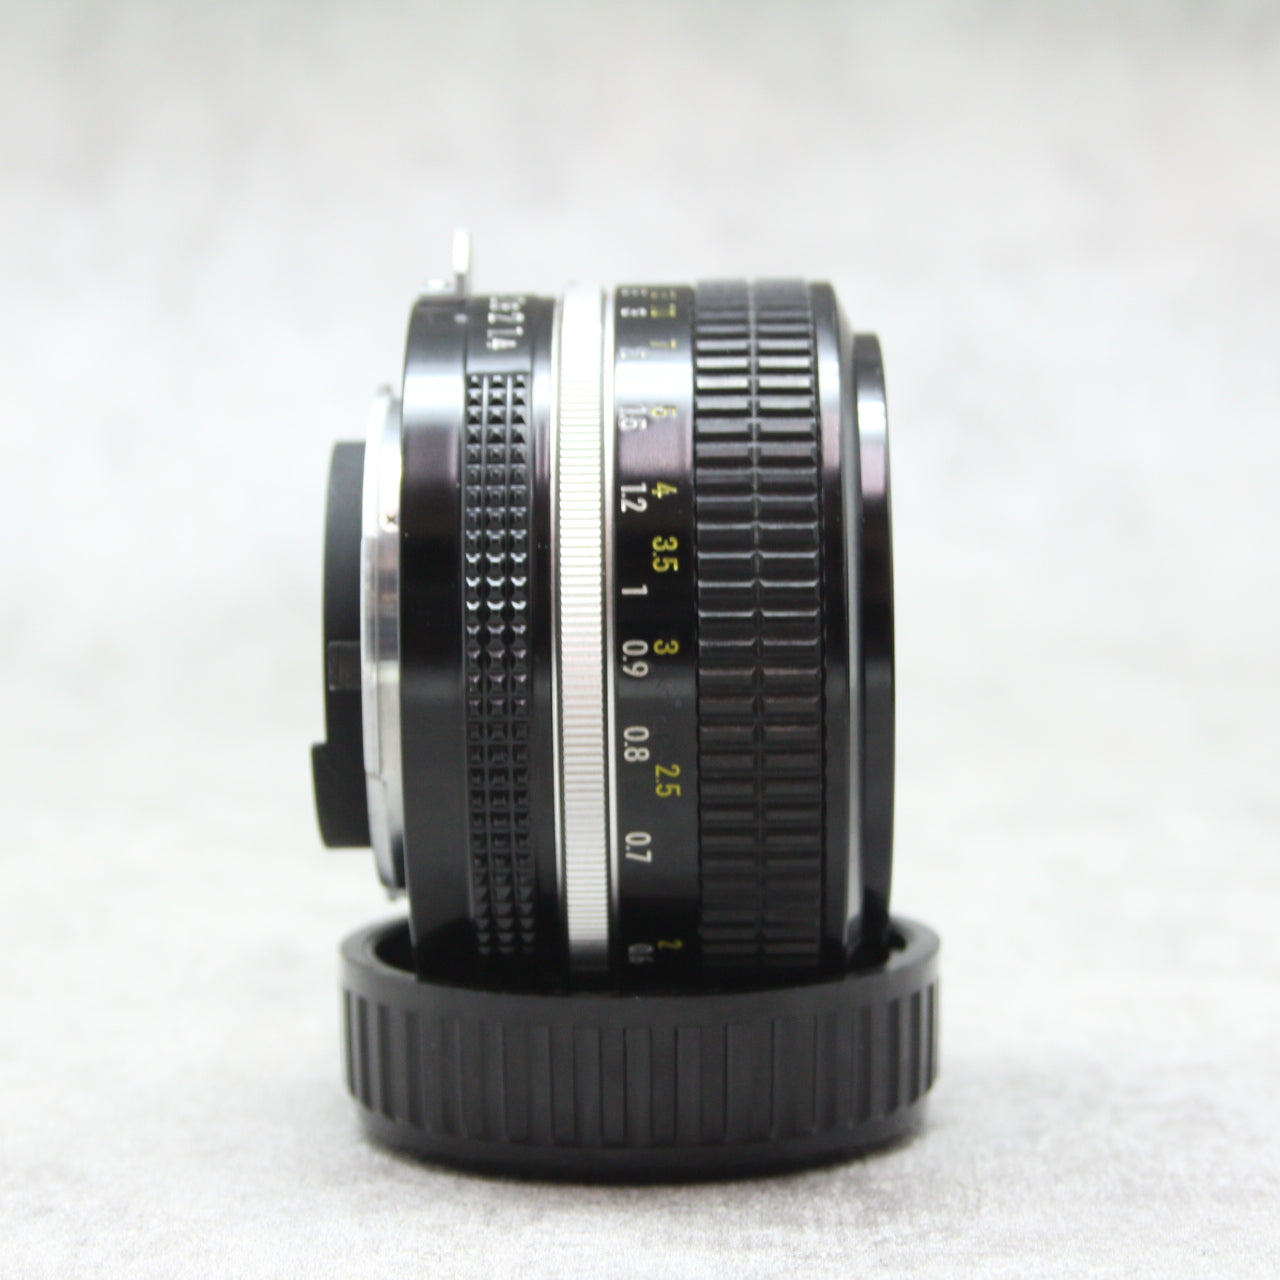 Nikon ニコン New Nikkor 50mm f1.4 非Ai